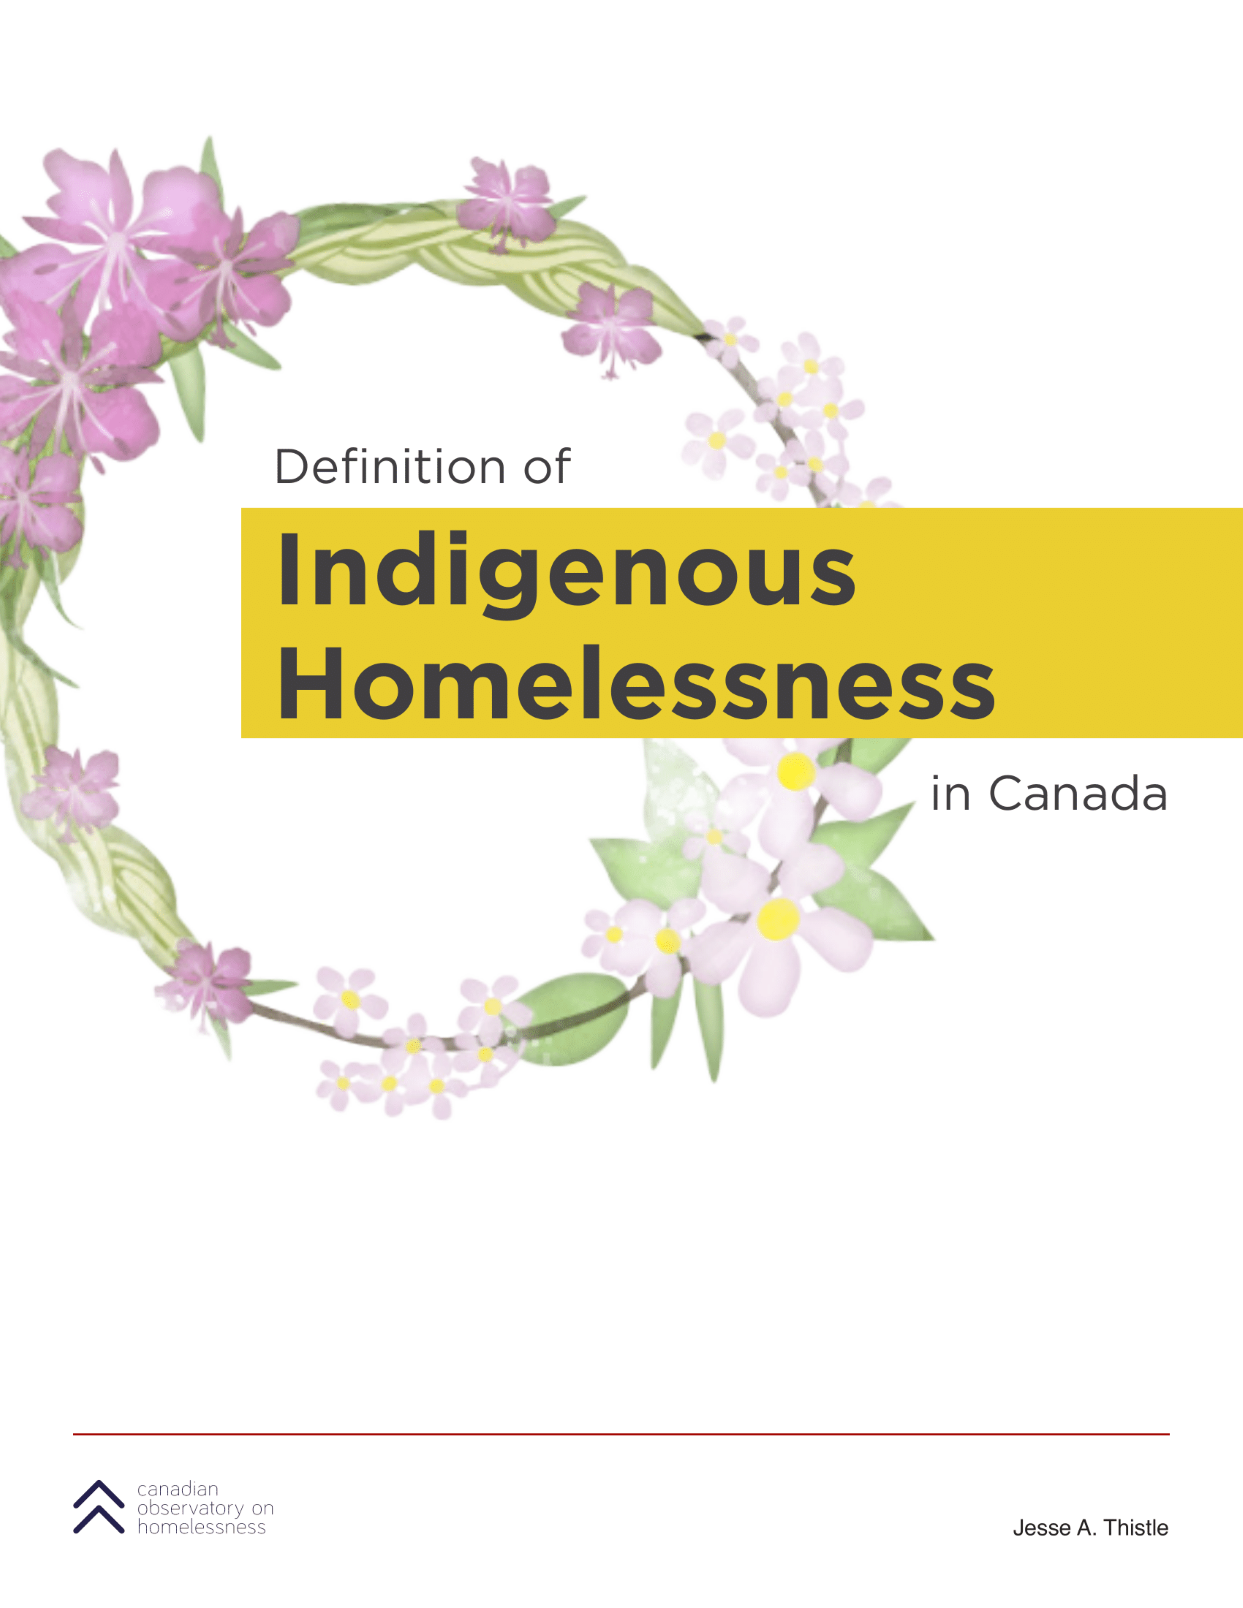 Front cover of the report "Definition of Indigenous Homelessness"